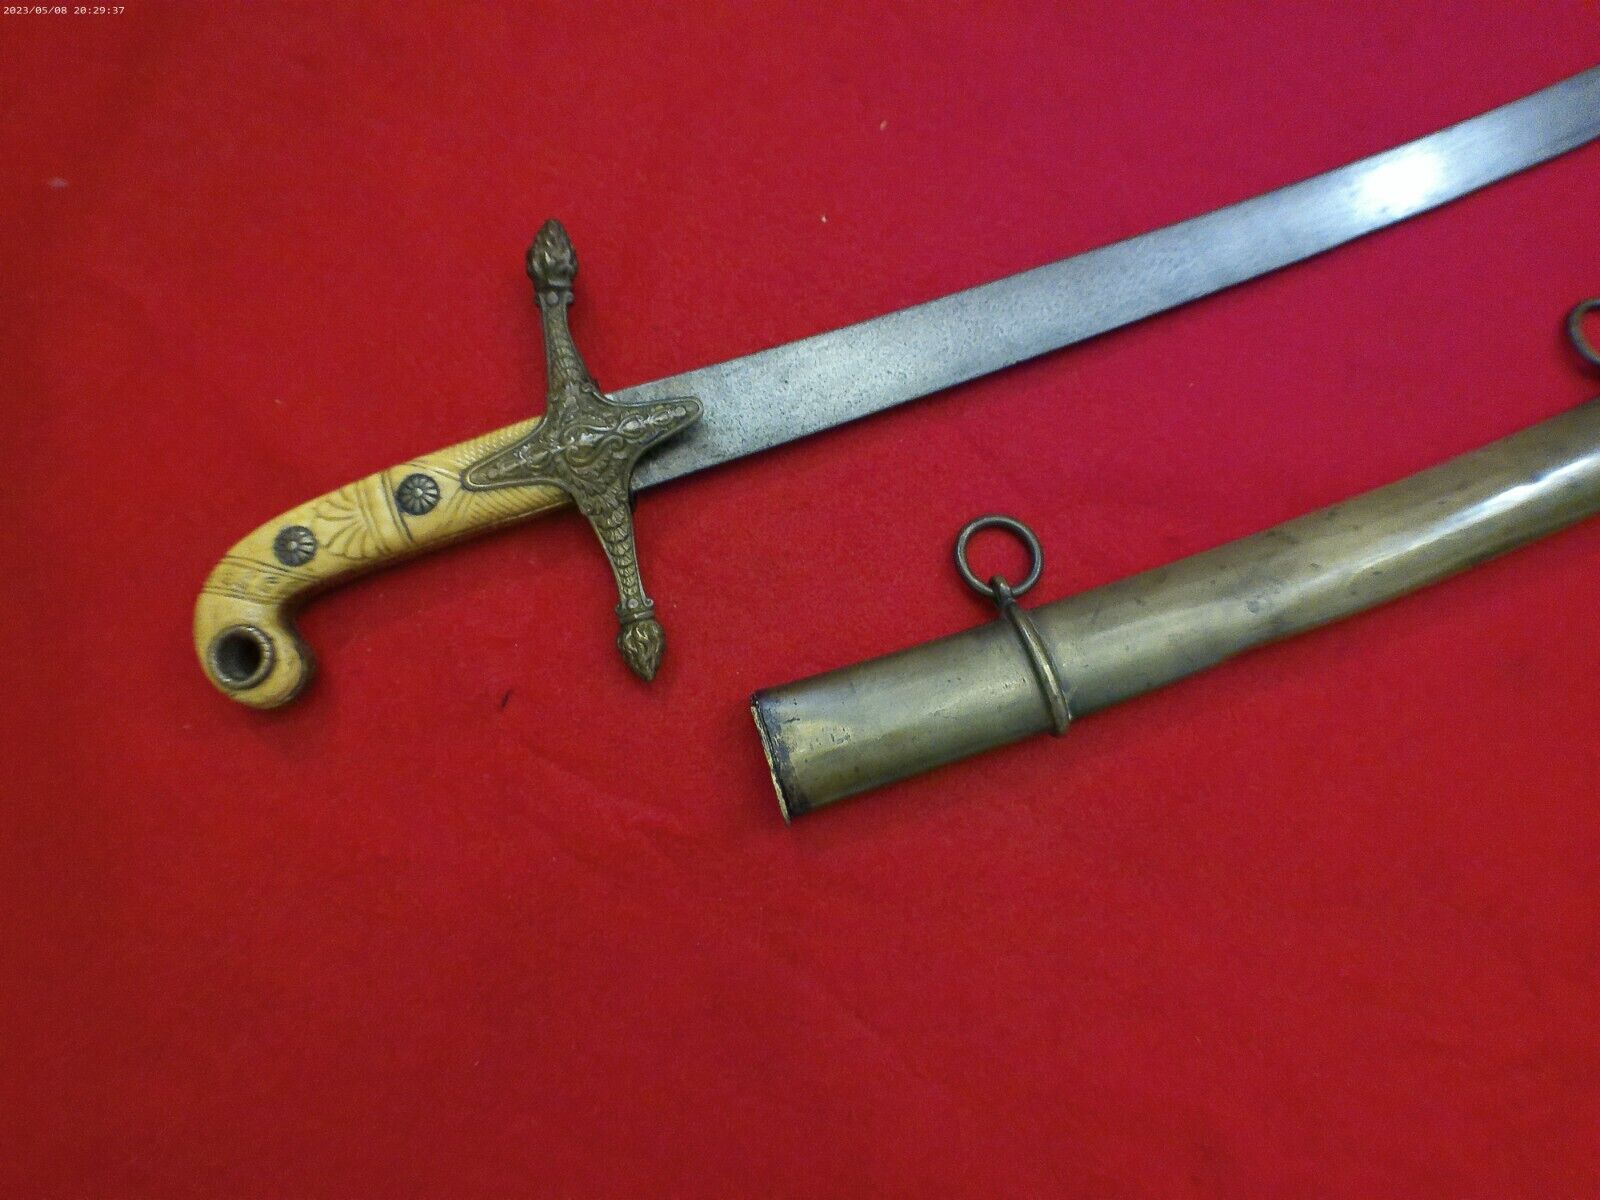 Early British Generals Mameluke Sword looks like for the 15th Hussars By Gill